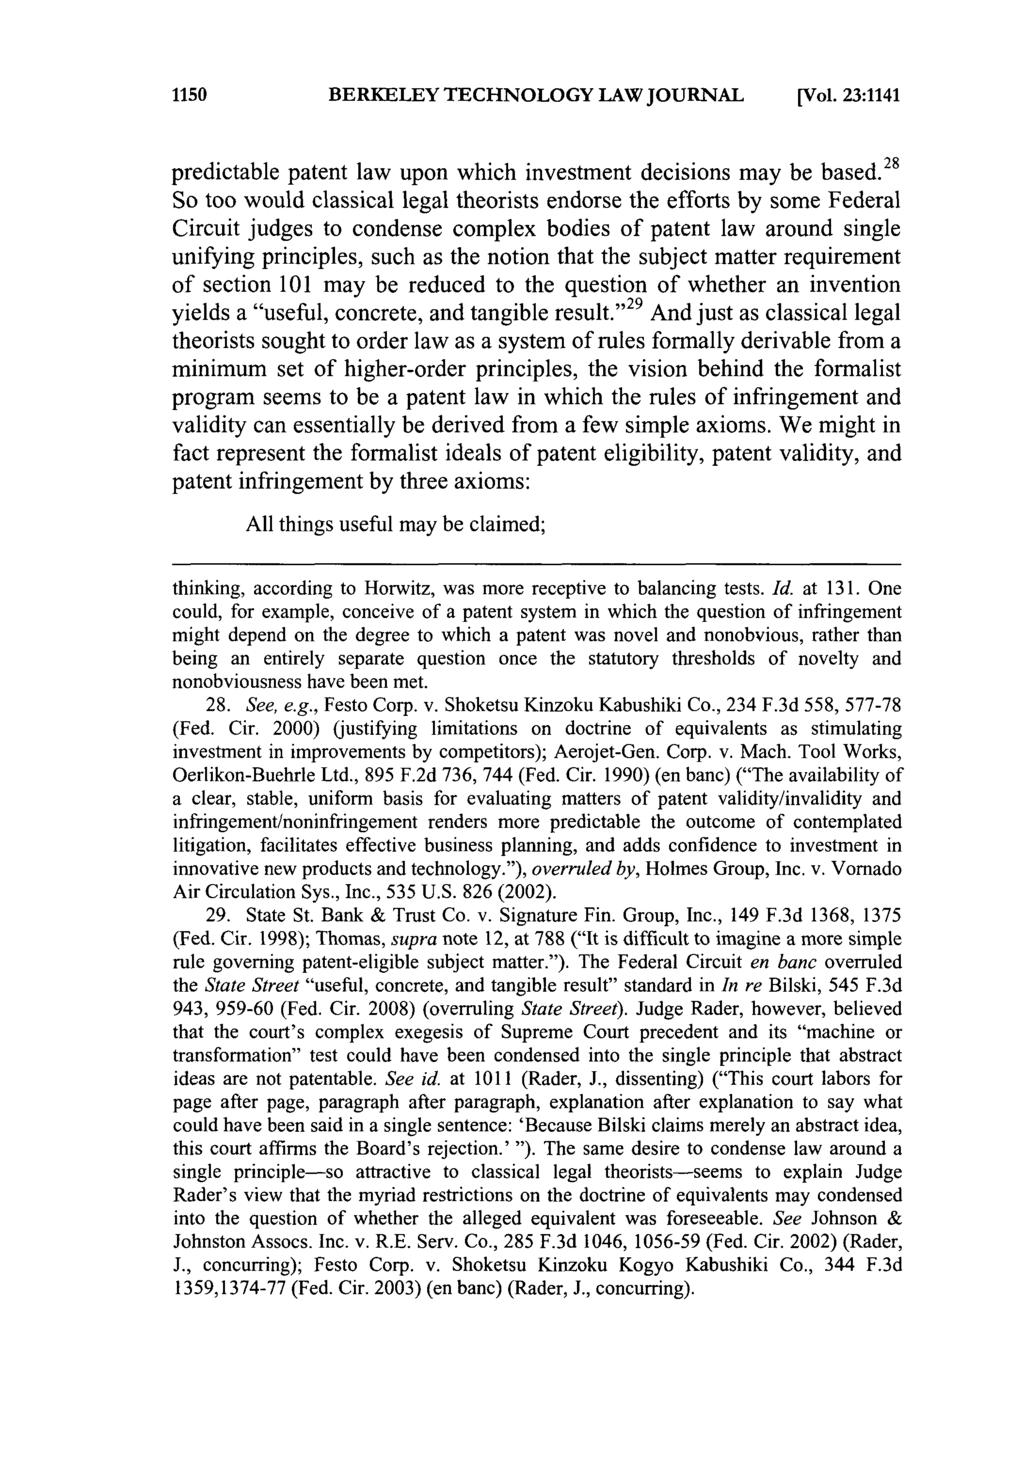 1150 BERKELEY TECHNOLOGY LAW JOURNAL [Vol. 23:1141 predictable patent law upon which investment decisions may be based.